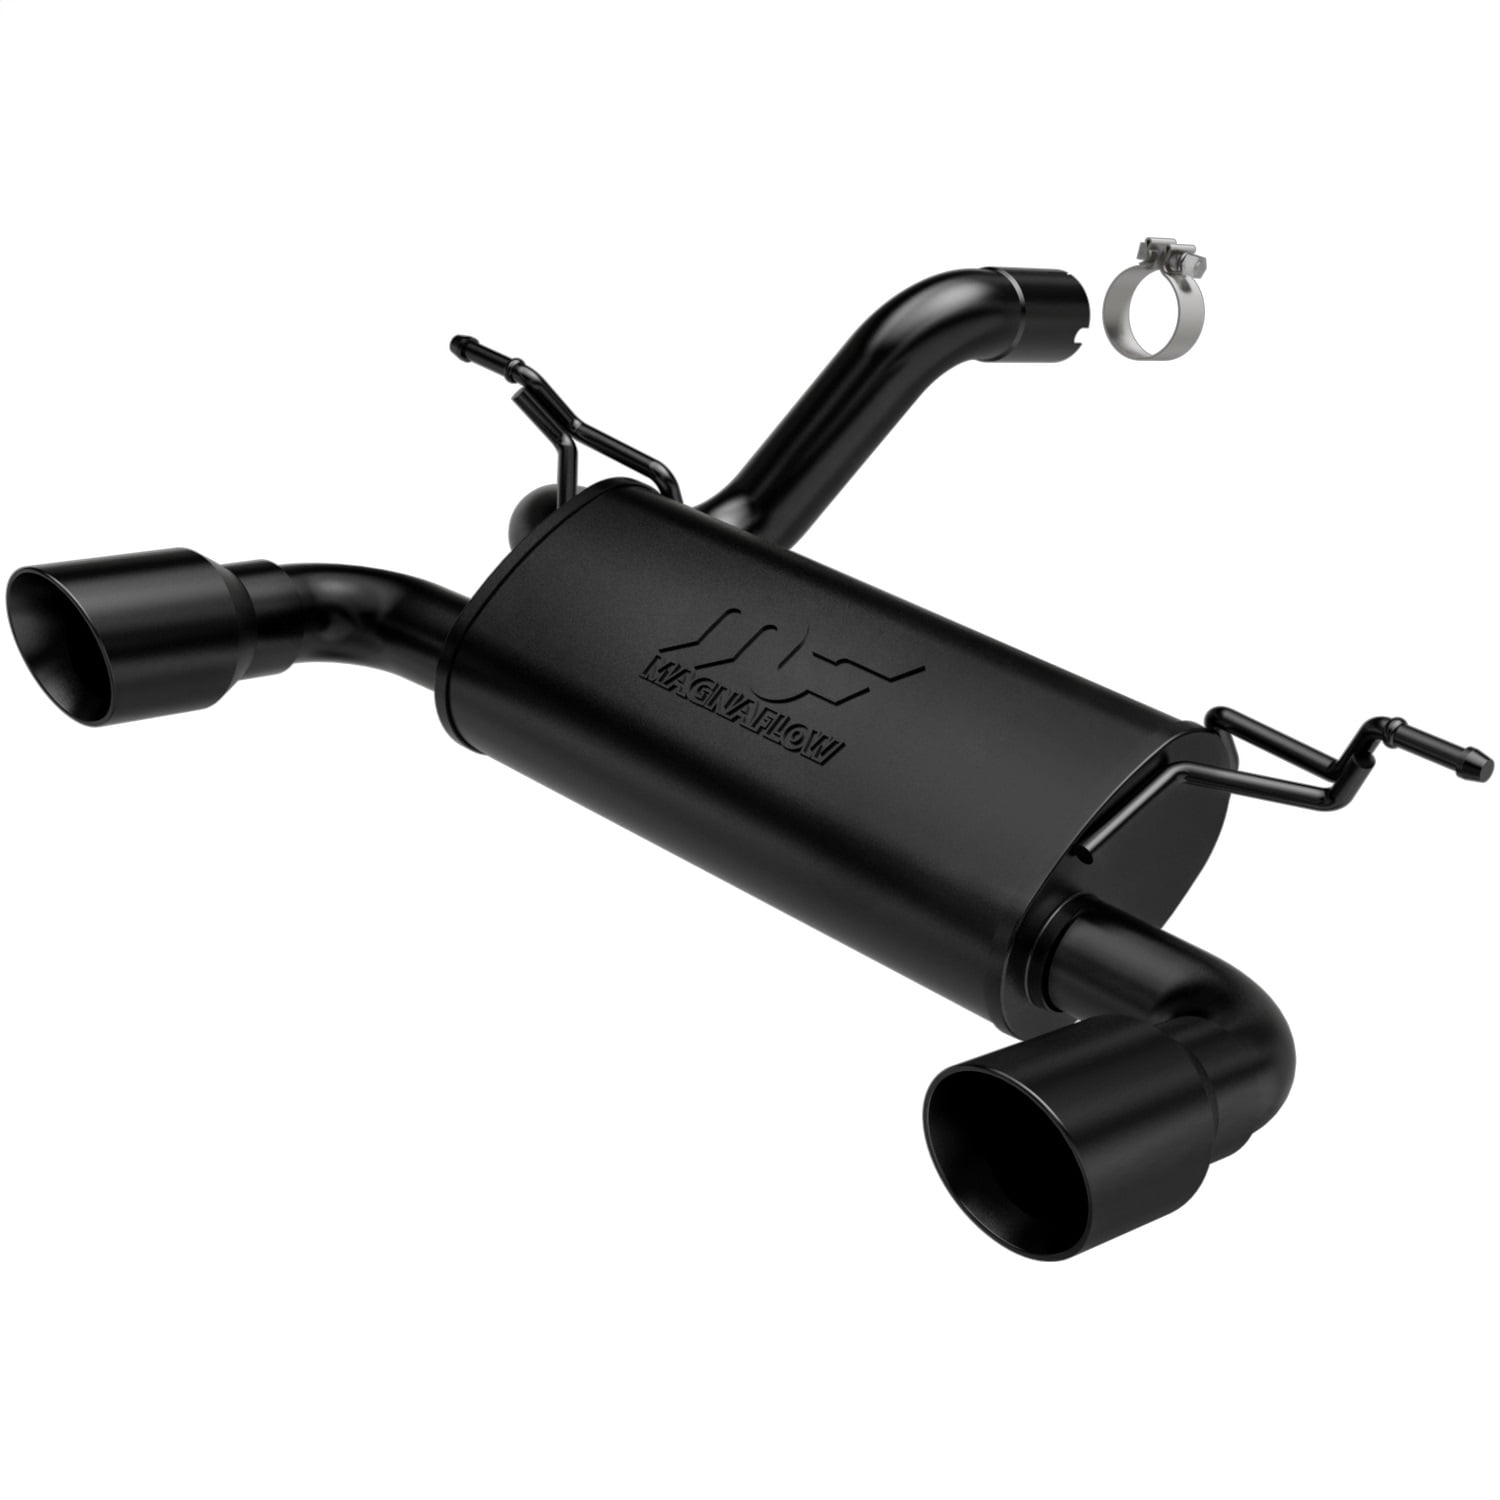 MagnaFlow 17109 Large Stainless Steel Performance Exhaust System Kit 